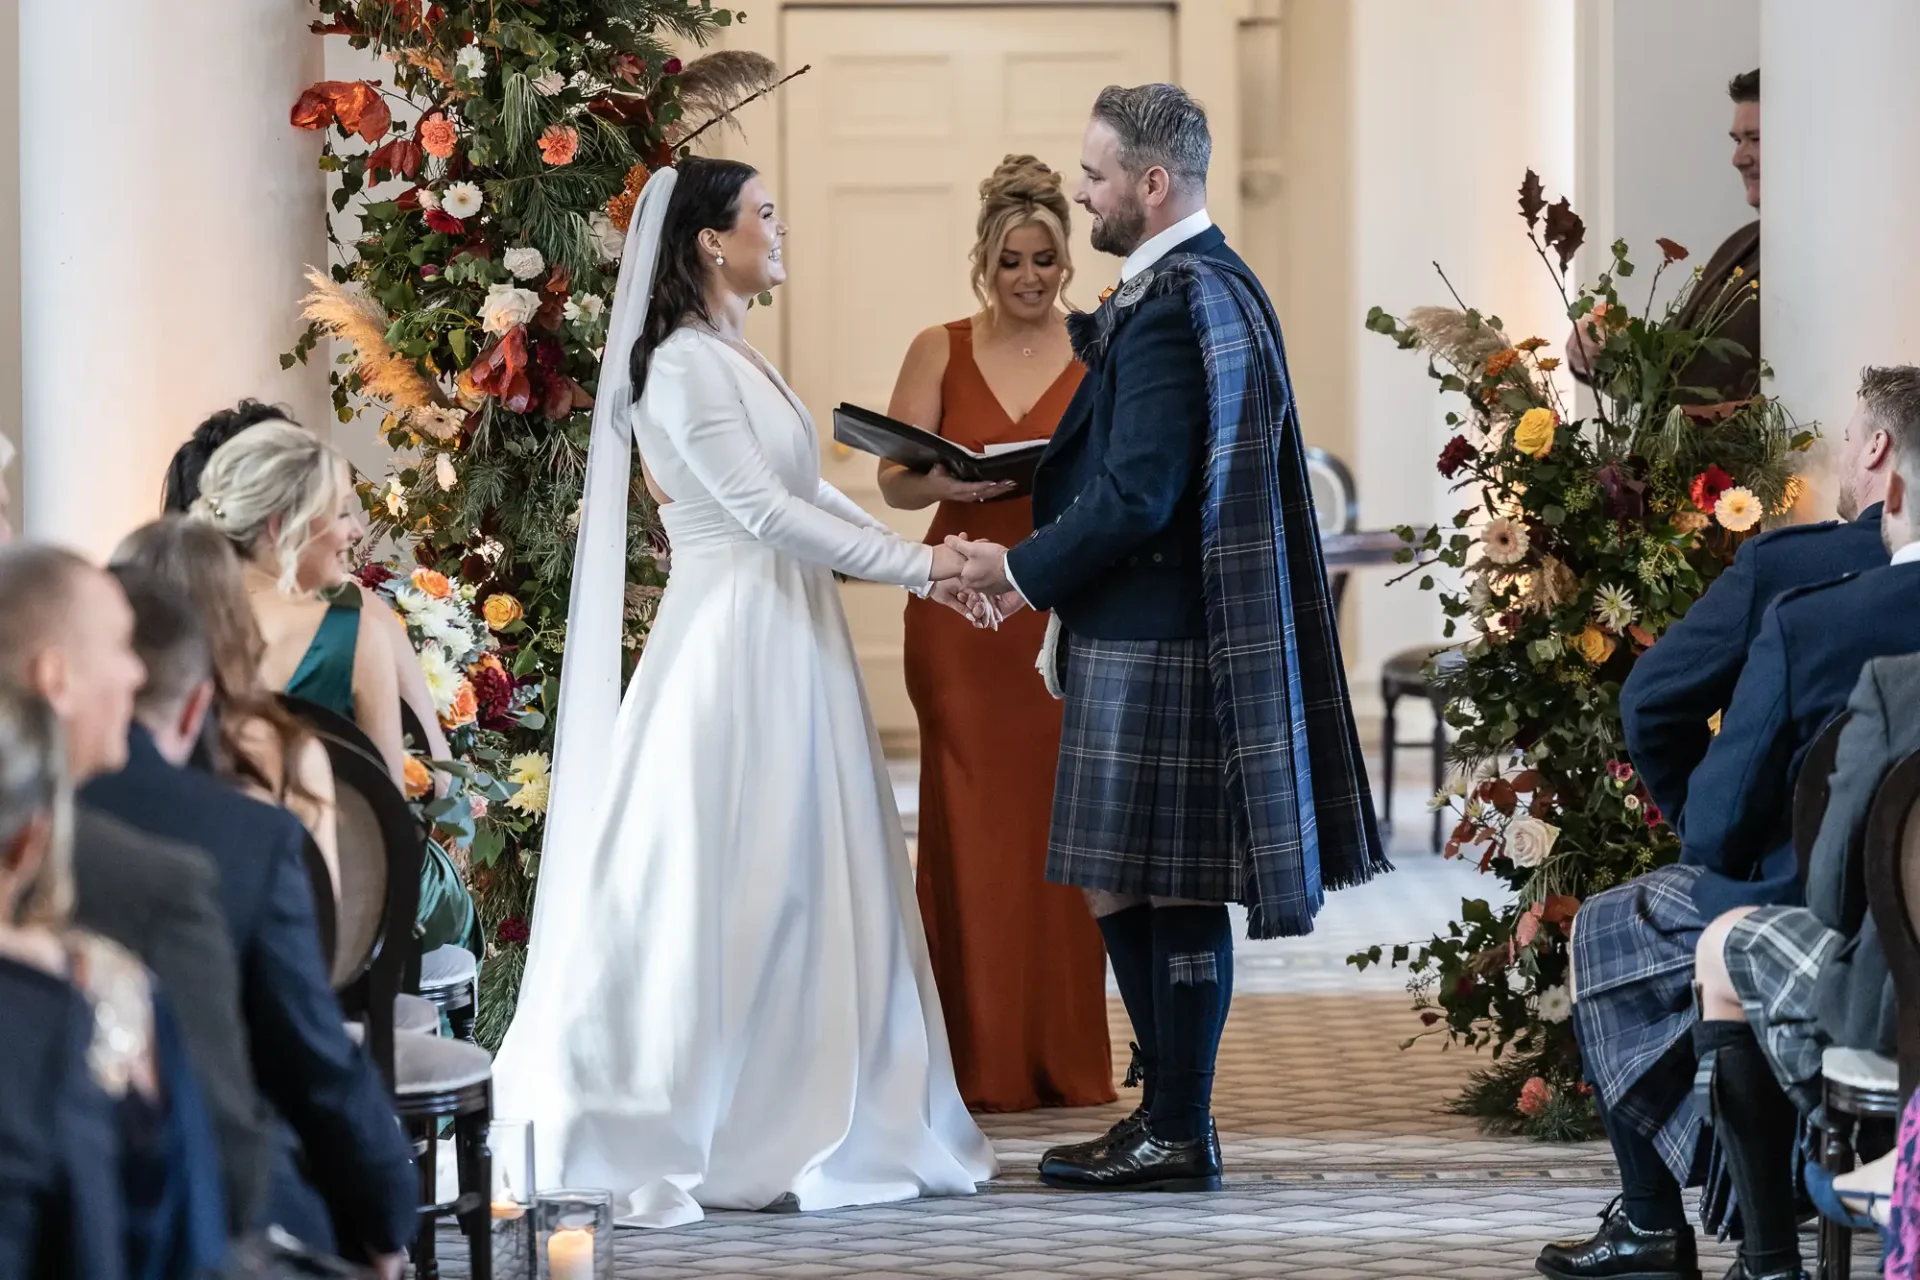 Bride and groom holding hands at their wedding ceremony, groom wearing a kilt, surrounded by guests and floral decorations.